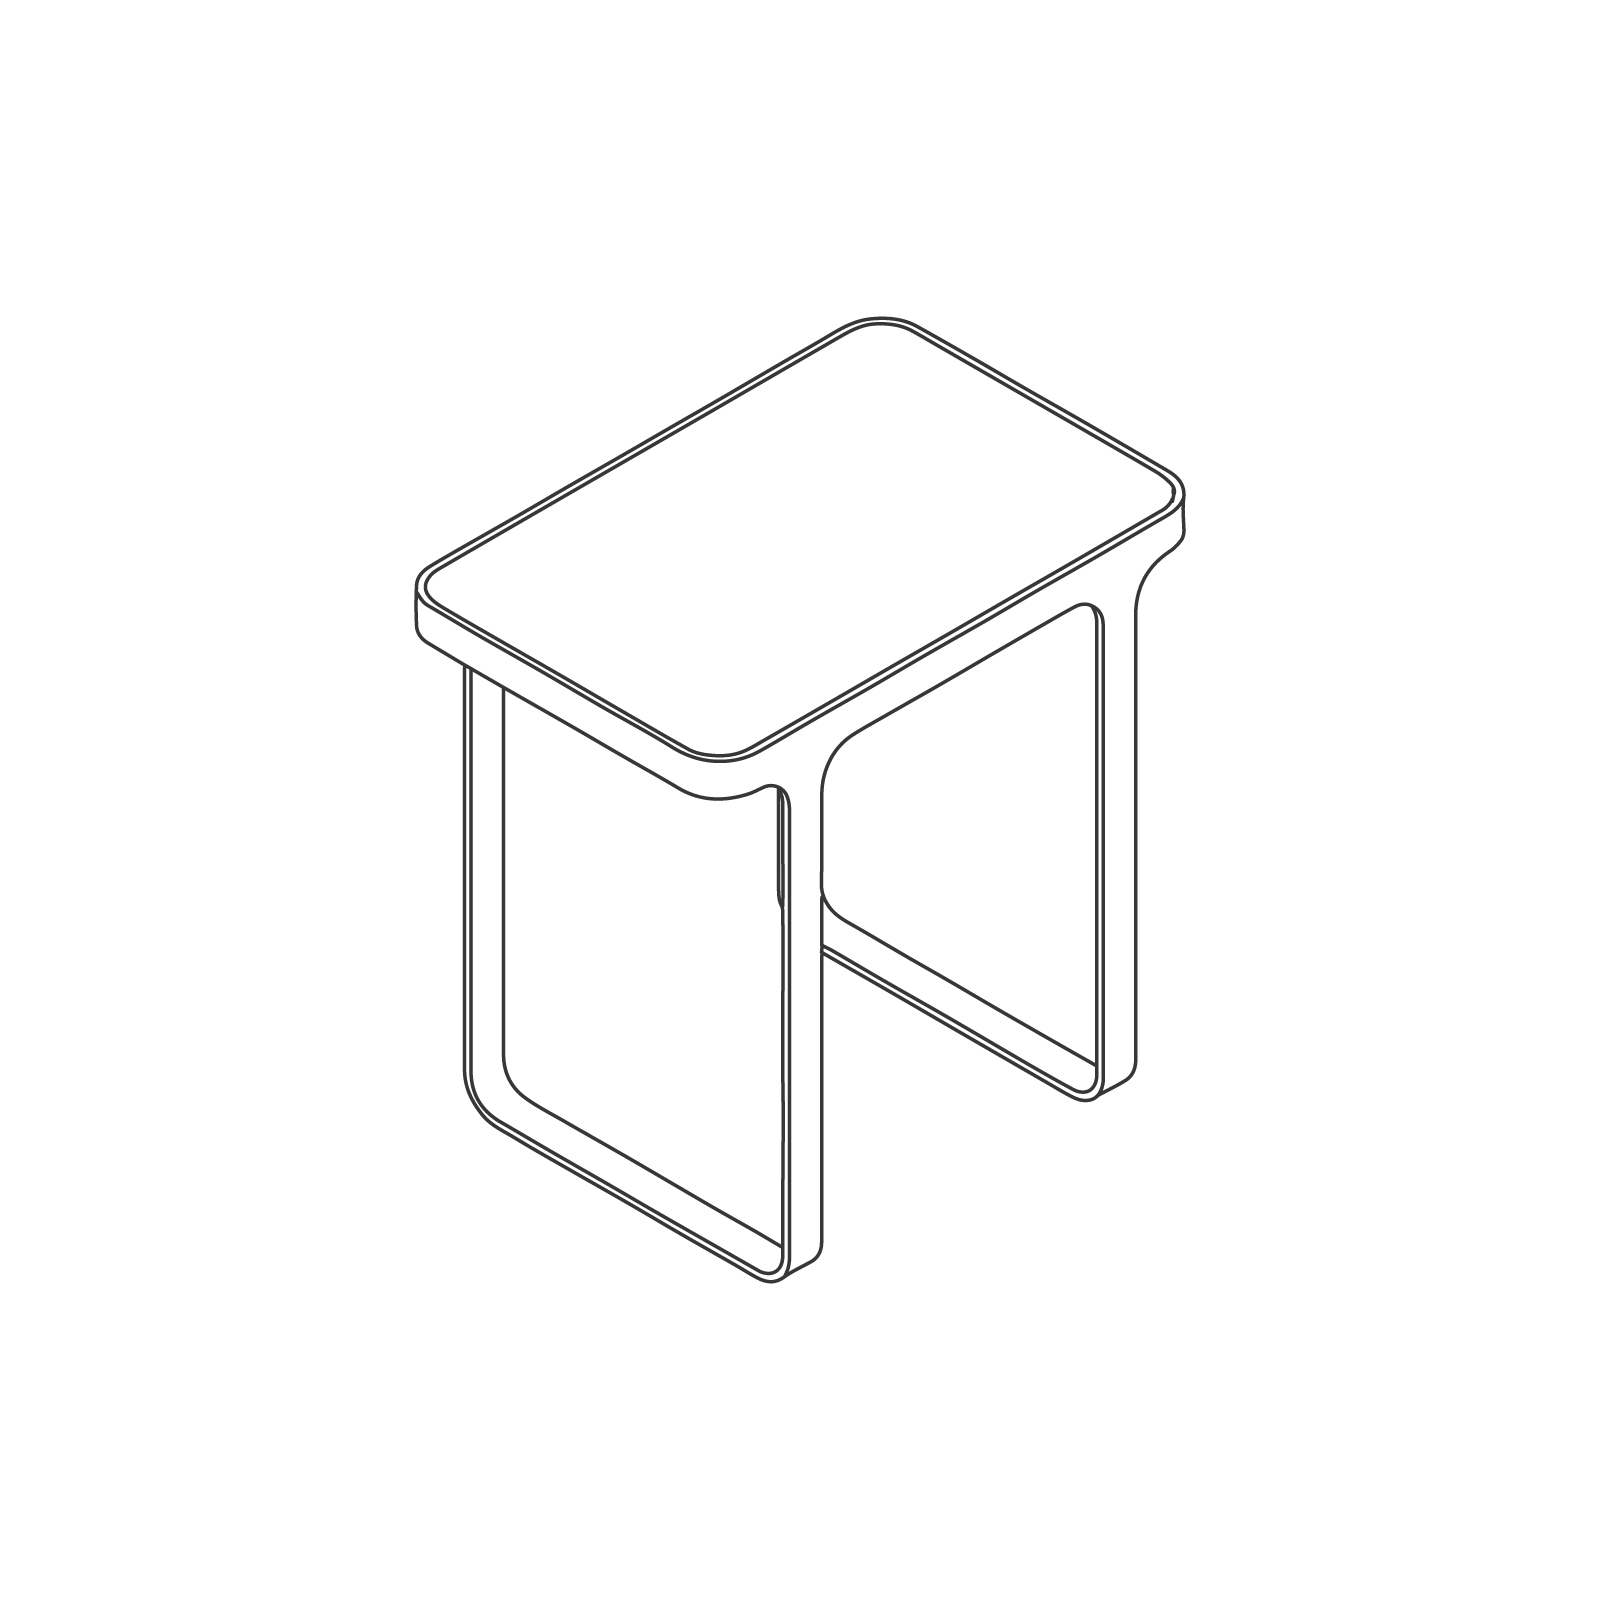 A line drawing of Trace Side Table.